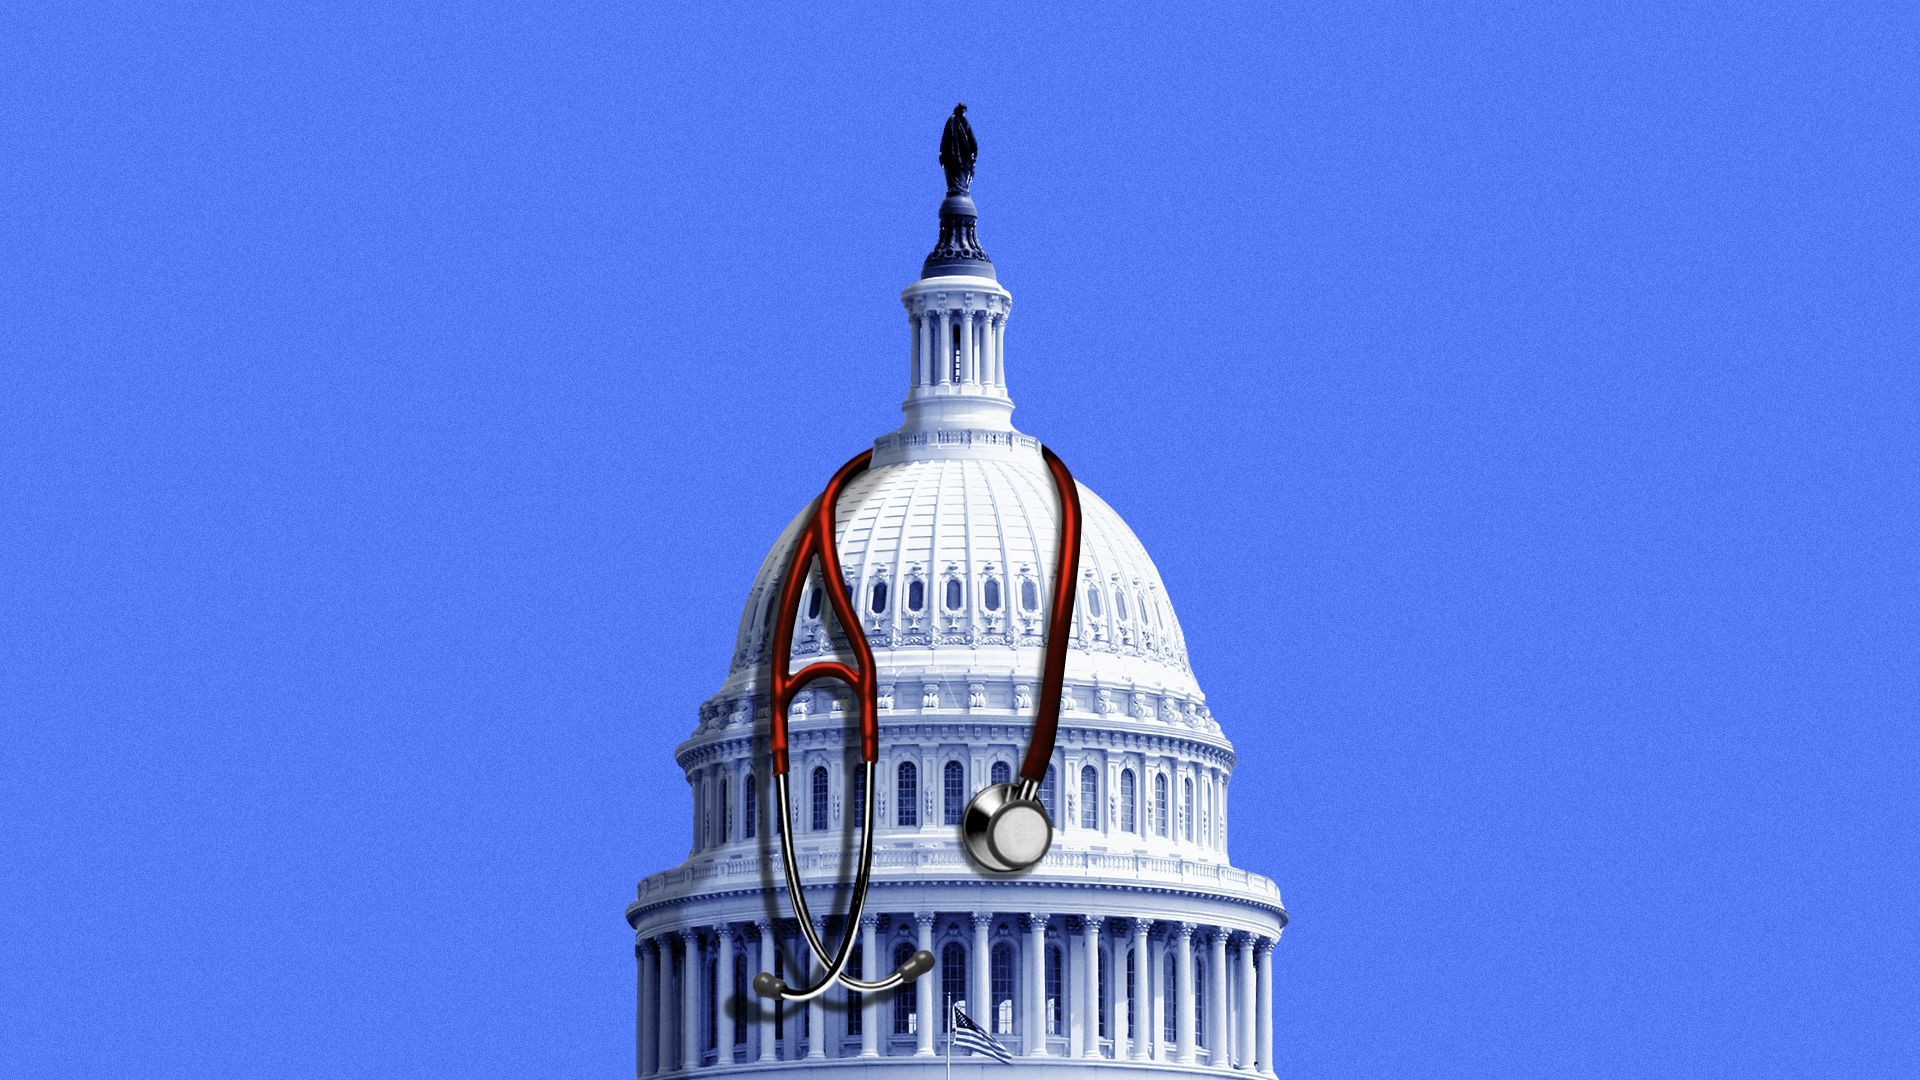 Illustration of the Capitol dome with a stethoscope around it